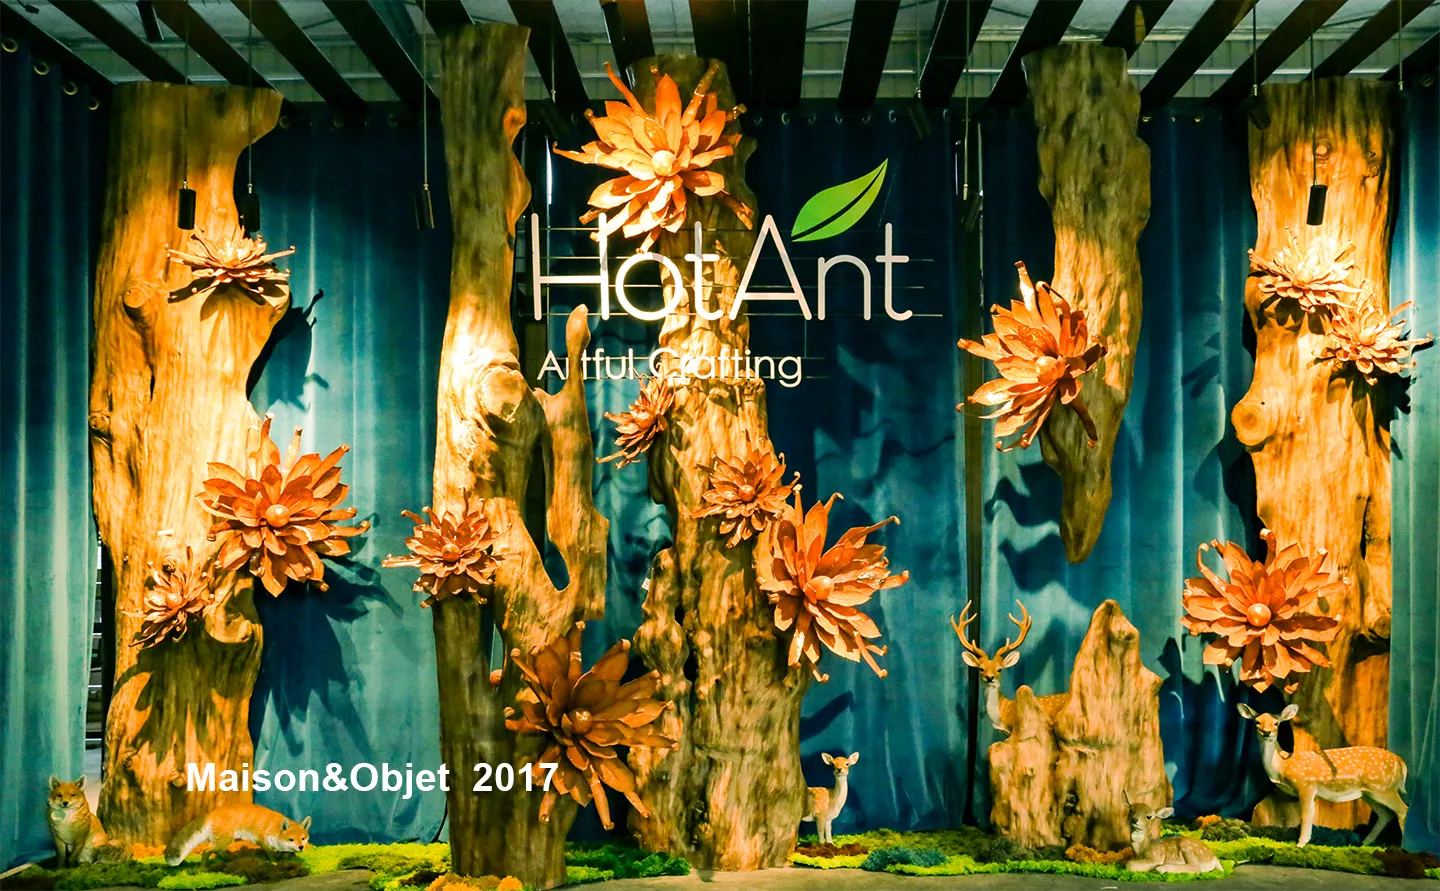 HotAnt stand at the Maison&Objet trade show in 2017